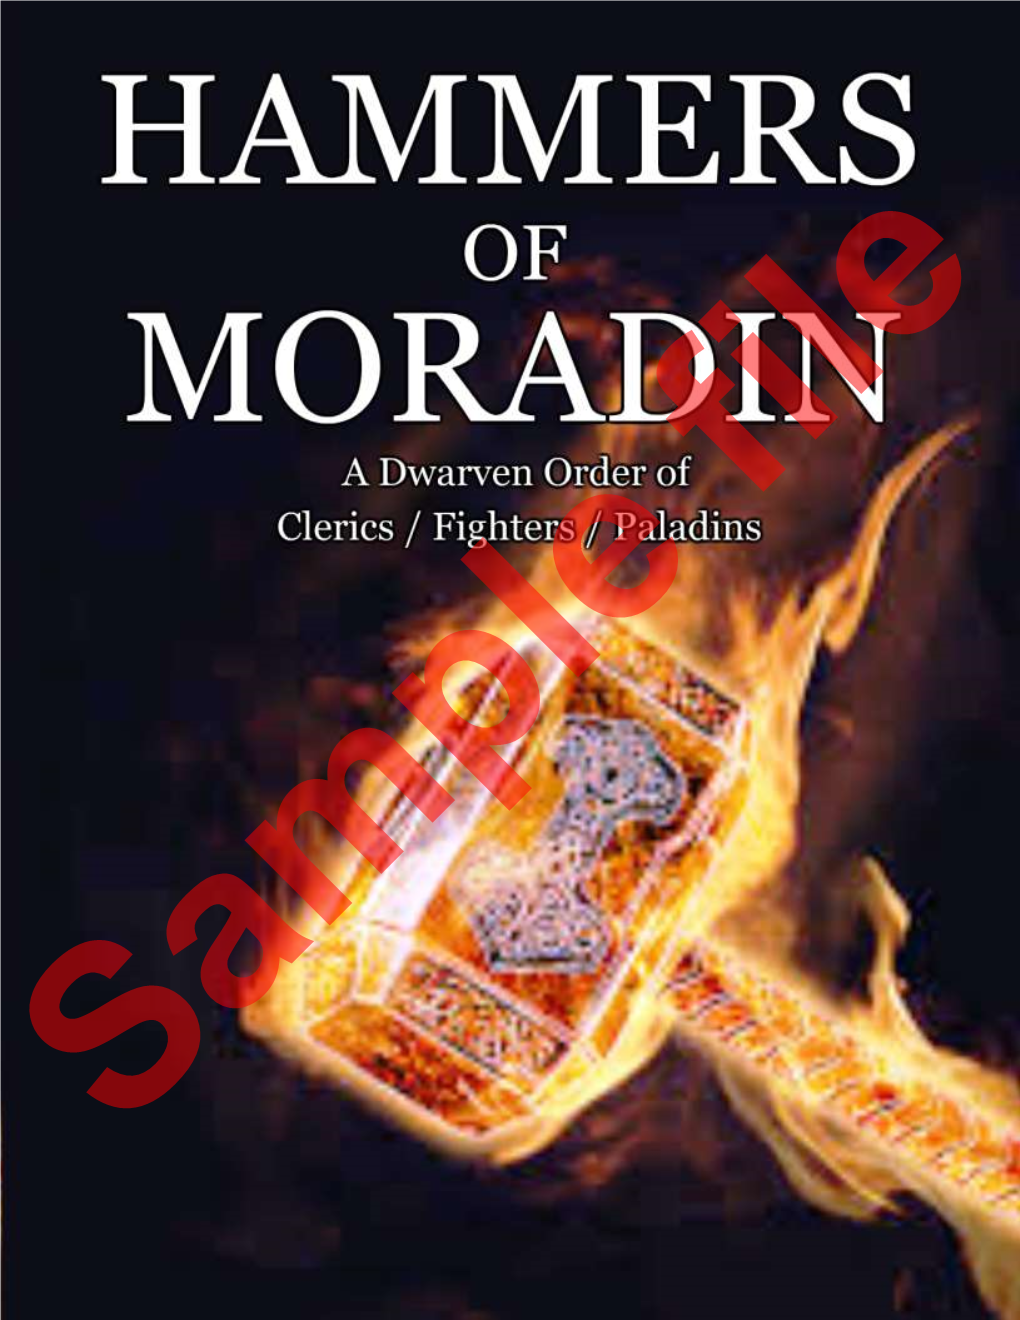 Hammers of Moradin Feat – Warhammer Throw Cleric – Guardian Domain Fighter – Dwarven Defender Paladin – Oath of Aegis